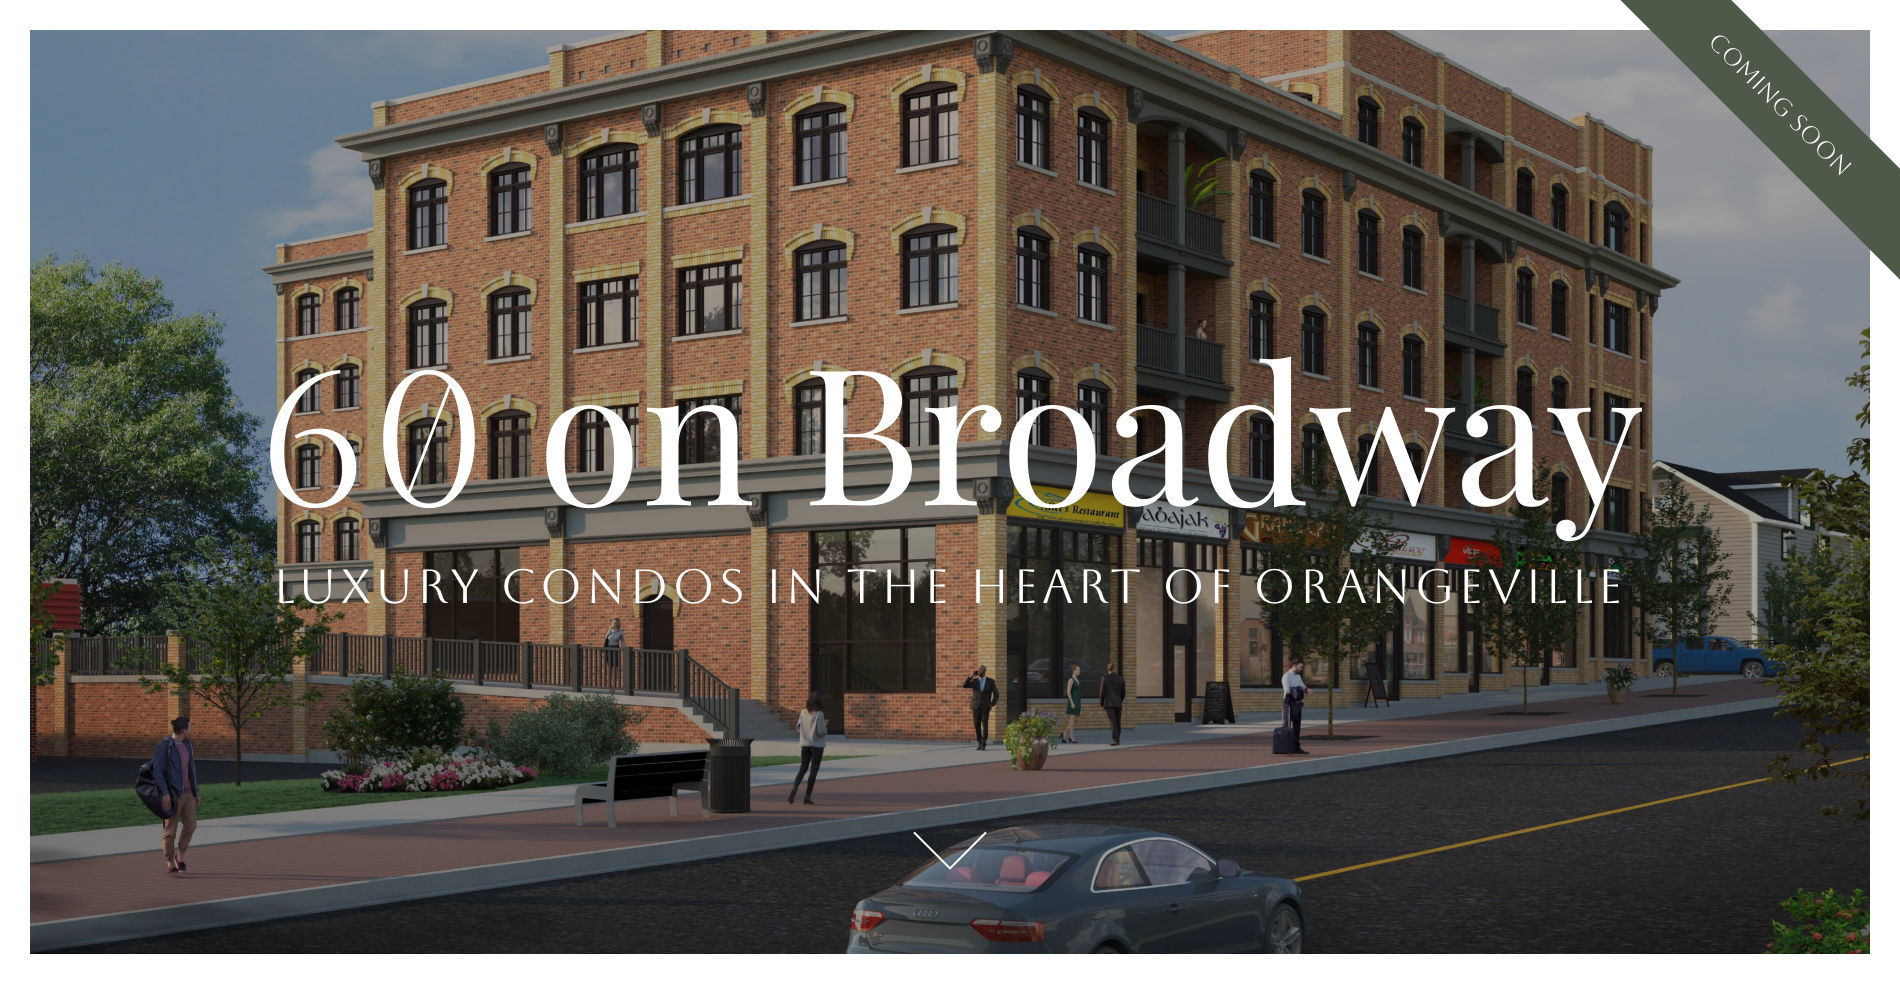 depicting a vfull-bleed website layout designed and developed for Orangeville Condominium Development 60 on Broadway. The website is hosted at 60onbroadway.com